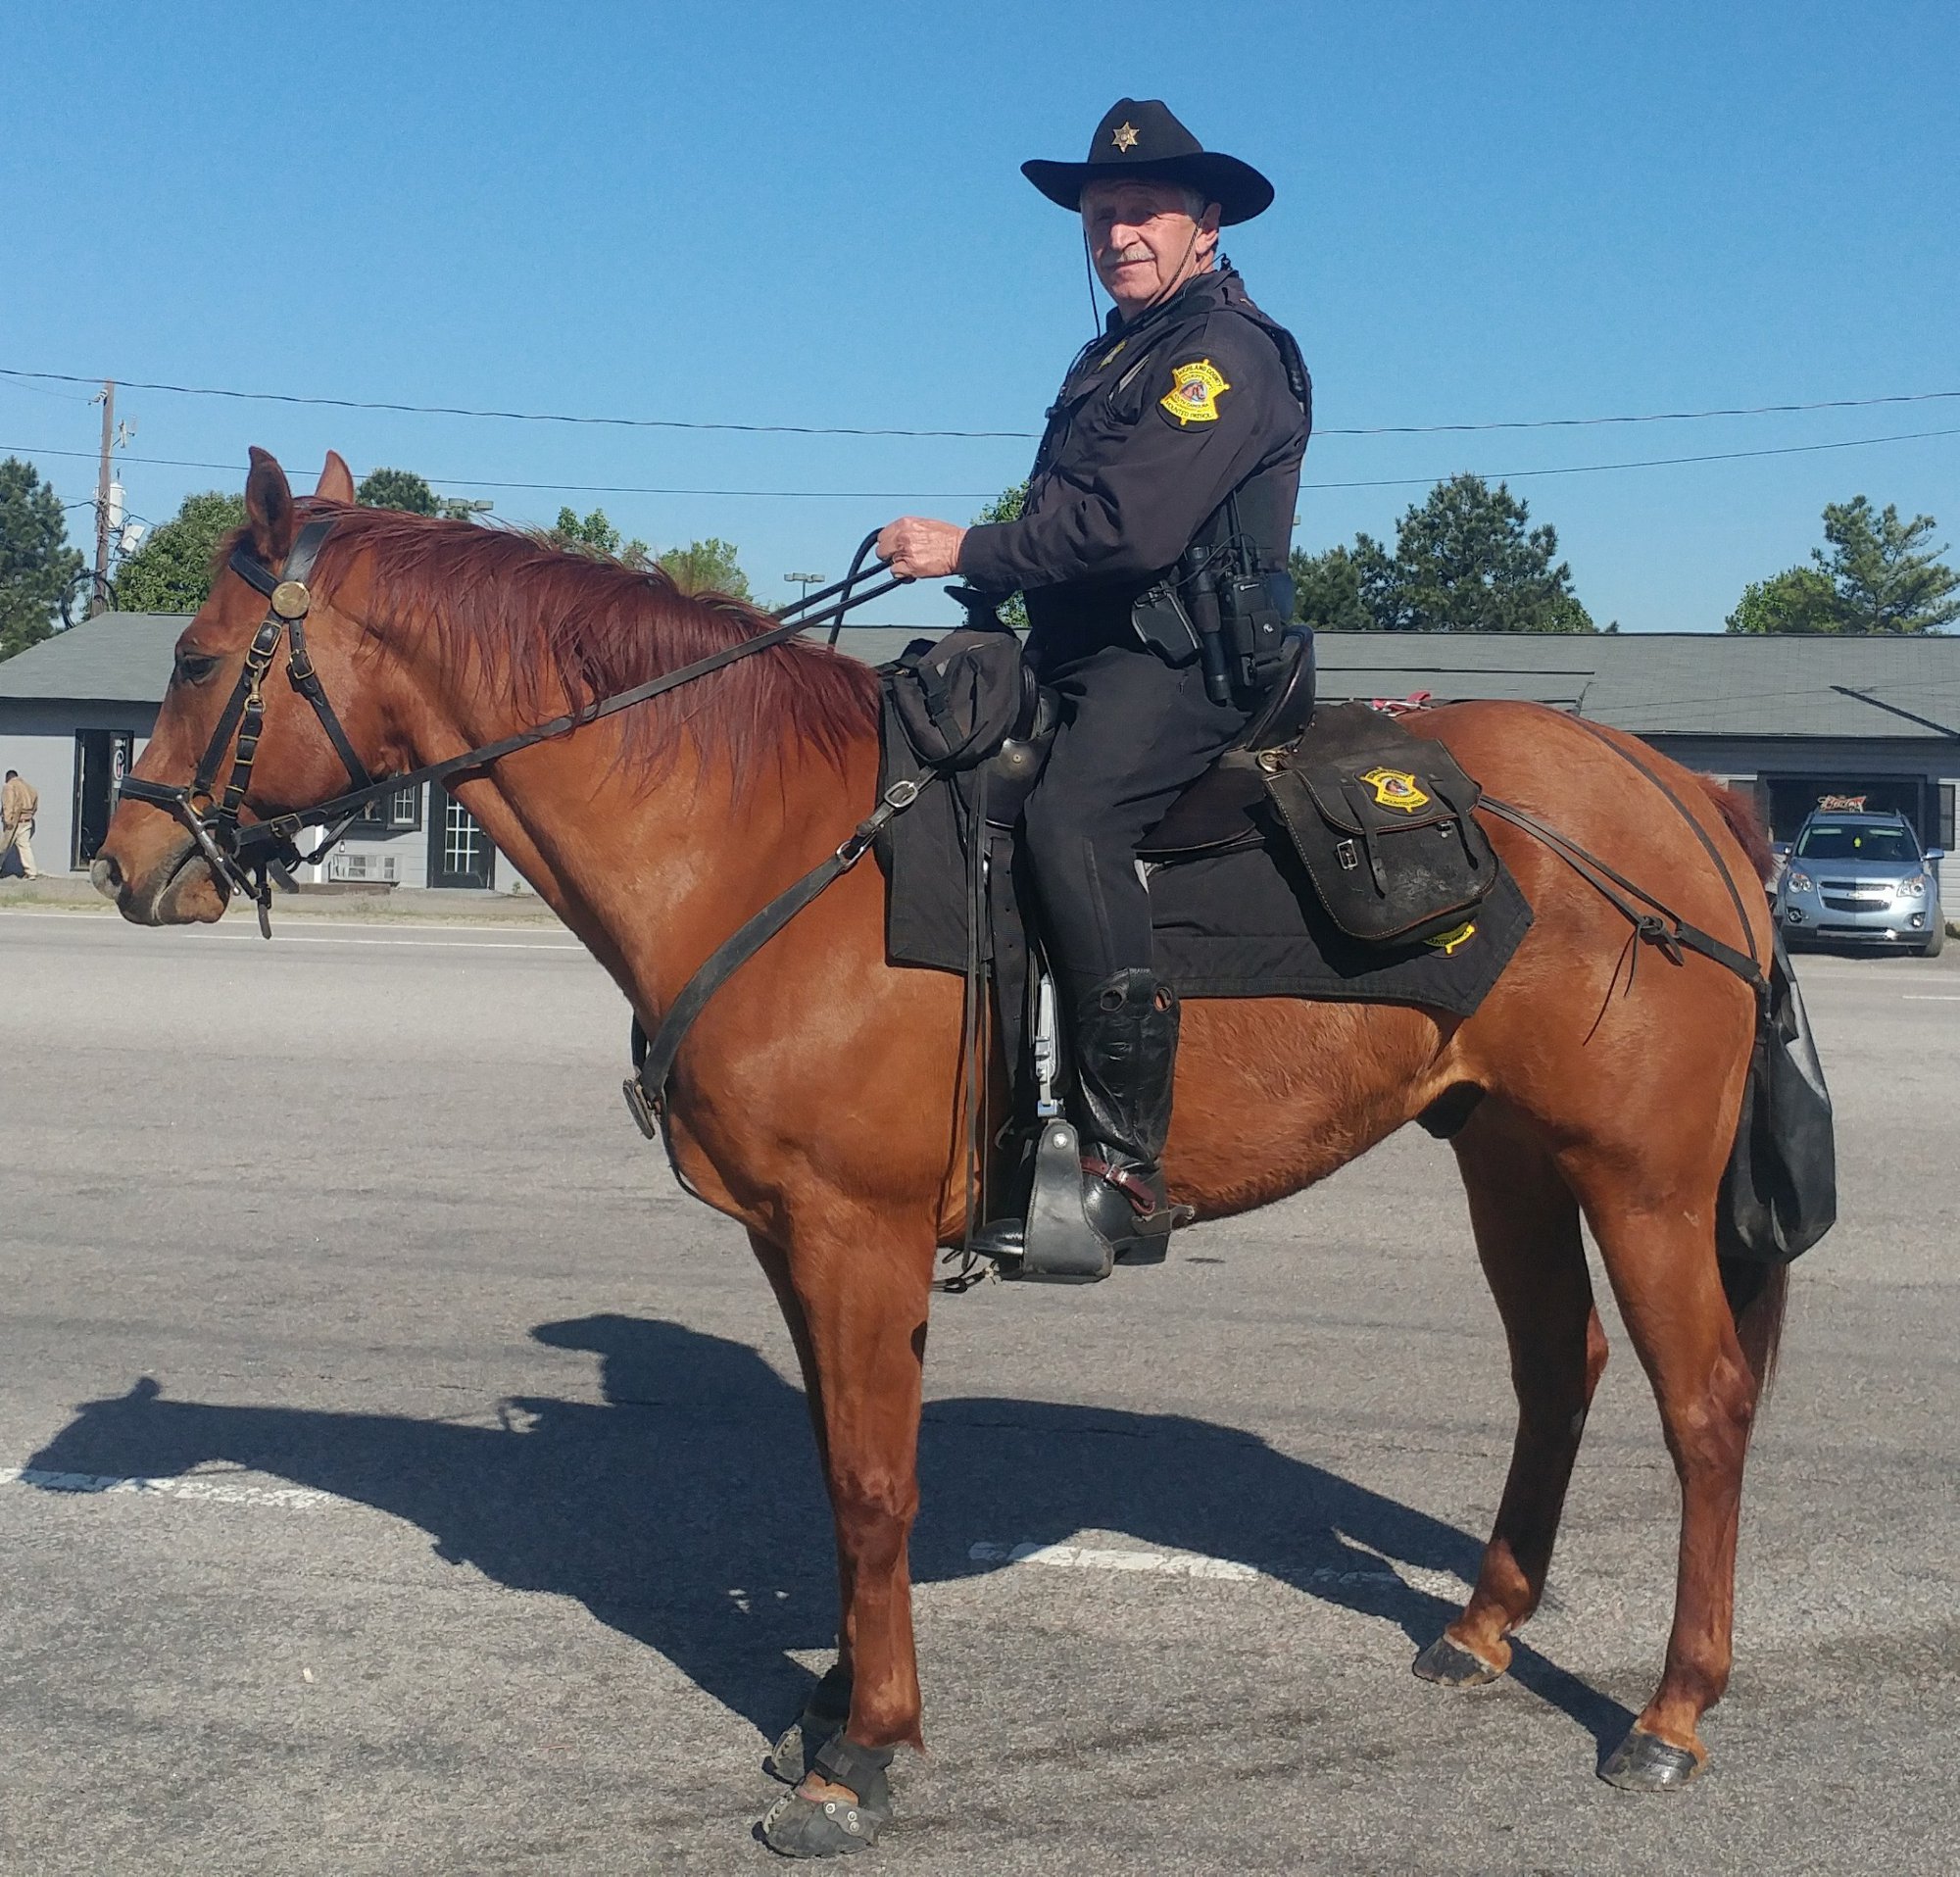 photo of Reserve Deputy on a horse